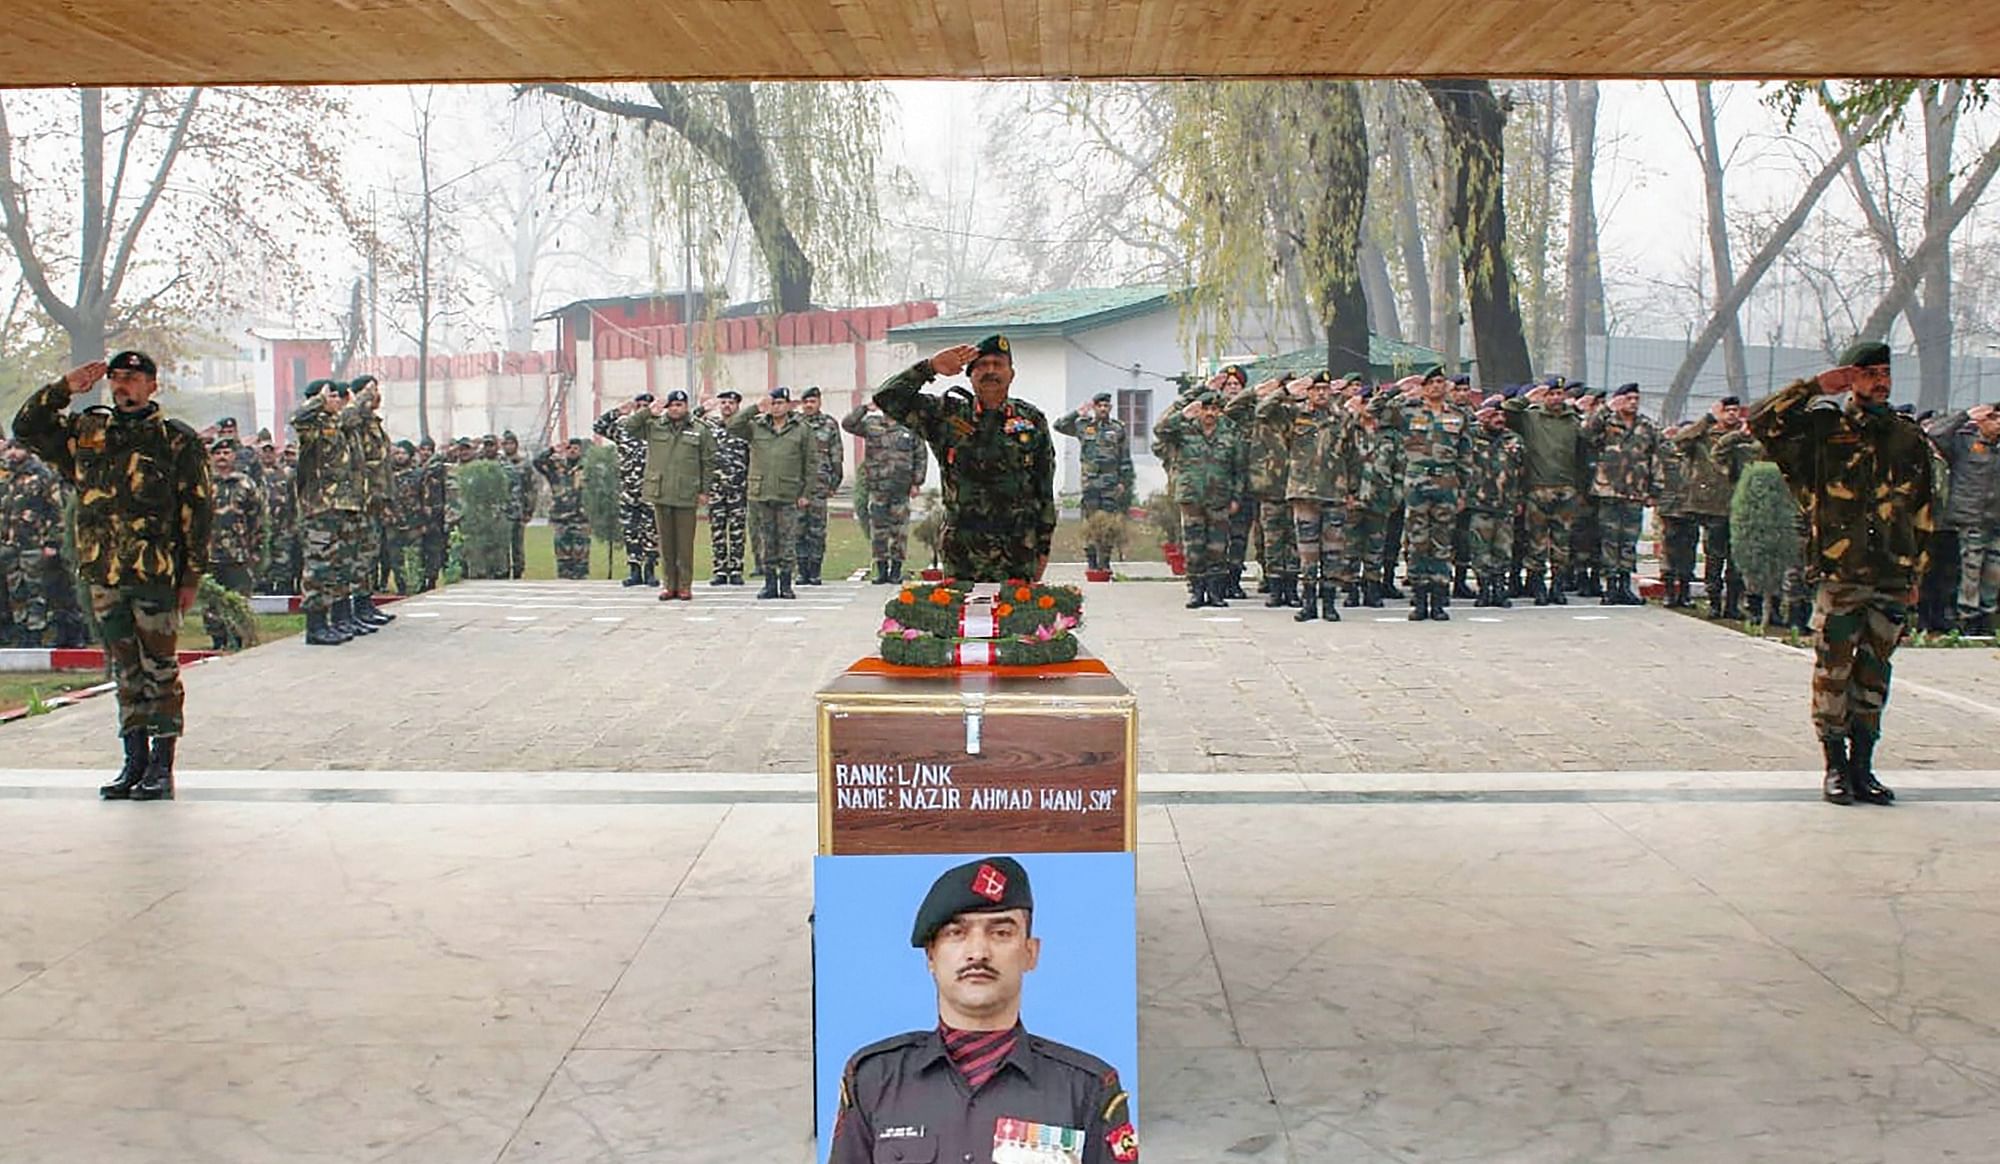 Army personnel pay tribute to Lance Naik Nazir Ahmad Wani of 34 RR, who lost his life while fighting terrorists in Shopian, South Kashmir.